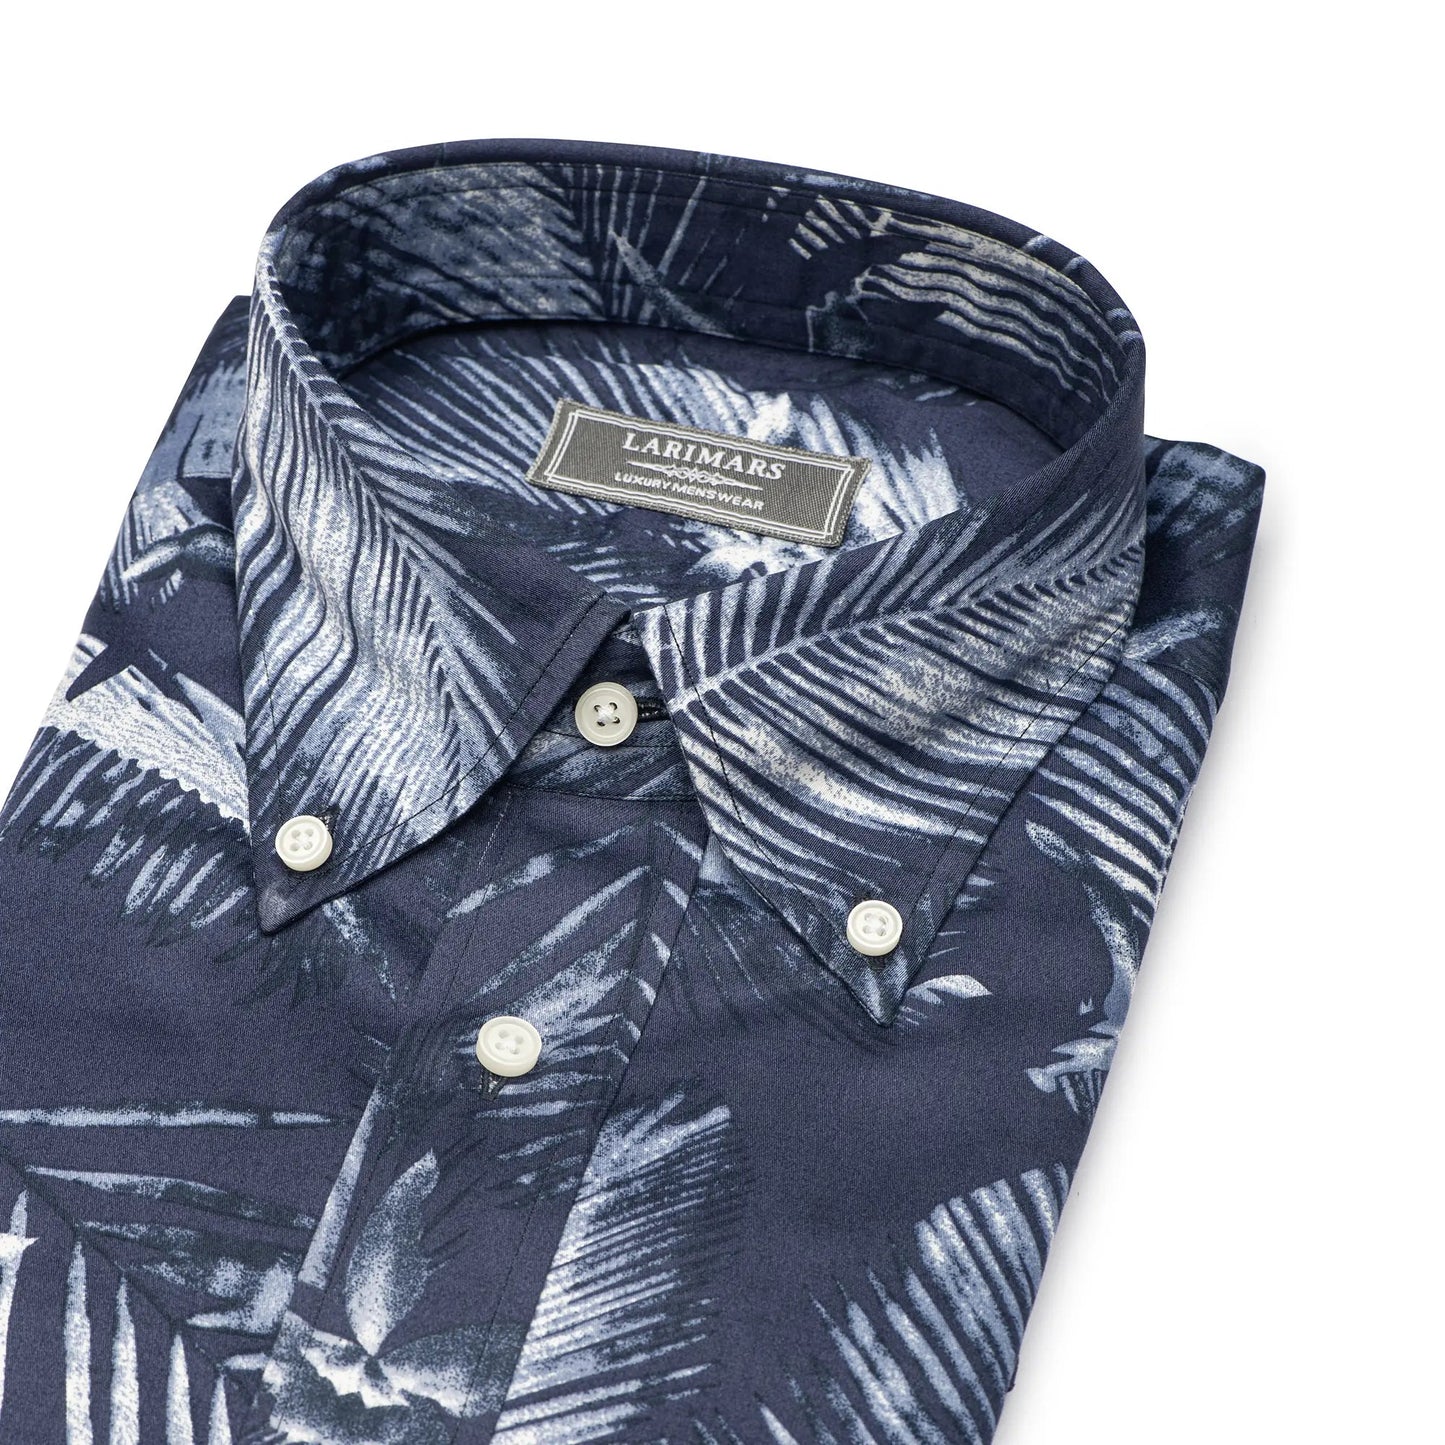 Blue Floral Print - Larimars Clothing Men's Formal and casual wear shirts